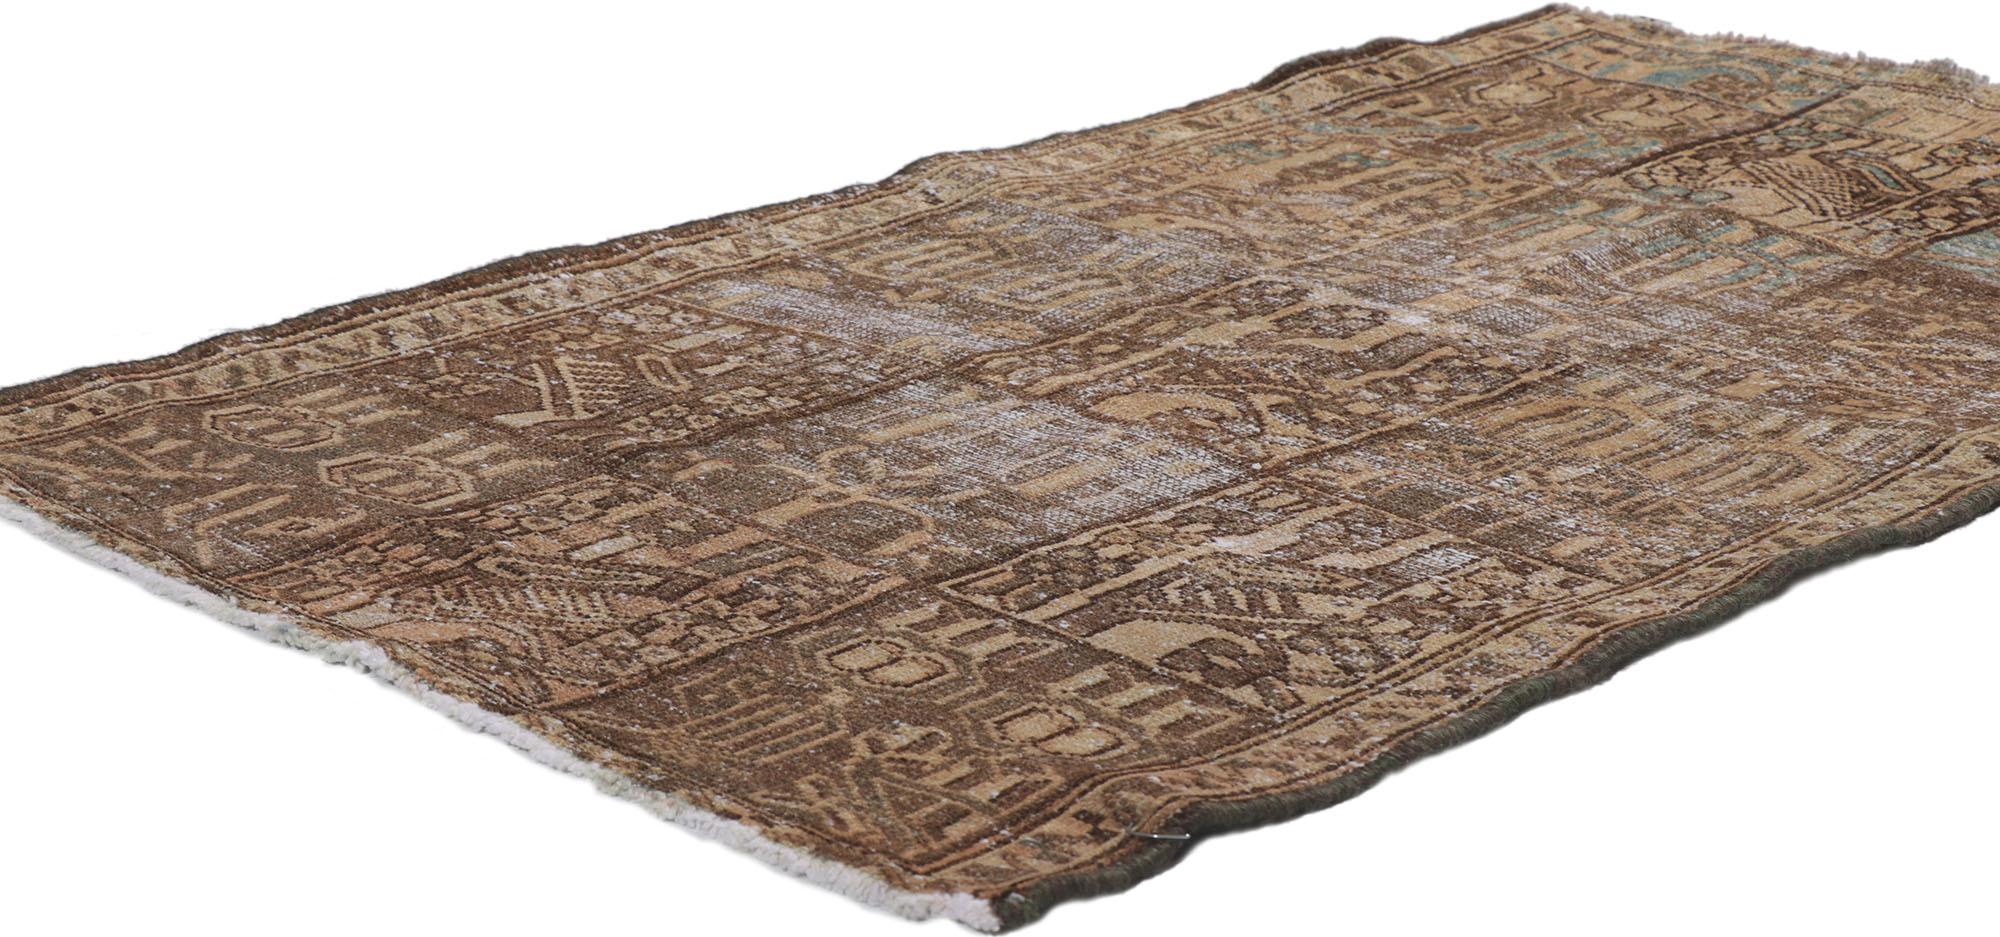 60986 distressed brown vintage Persian Bakhtiari rug with square Panels 02'07 x 04'00. Cleverly composed and distinctively well-balanced, this hand knotted wool distressed antique Persian Bakhtiari rug will take on a curated lived-in look that feels